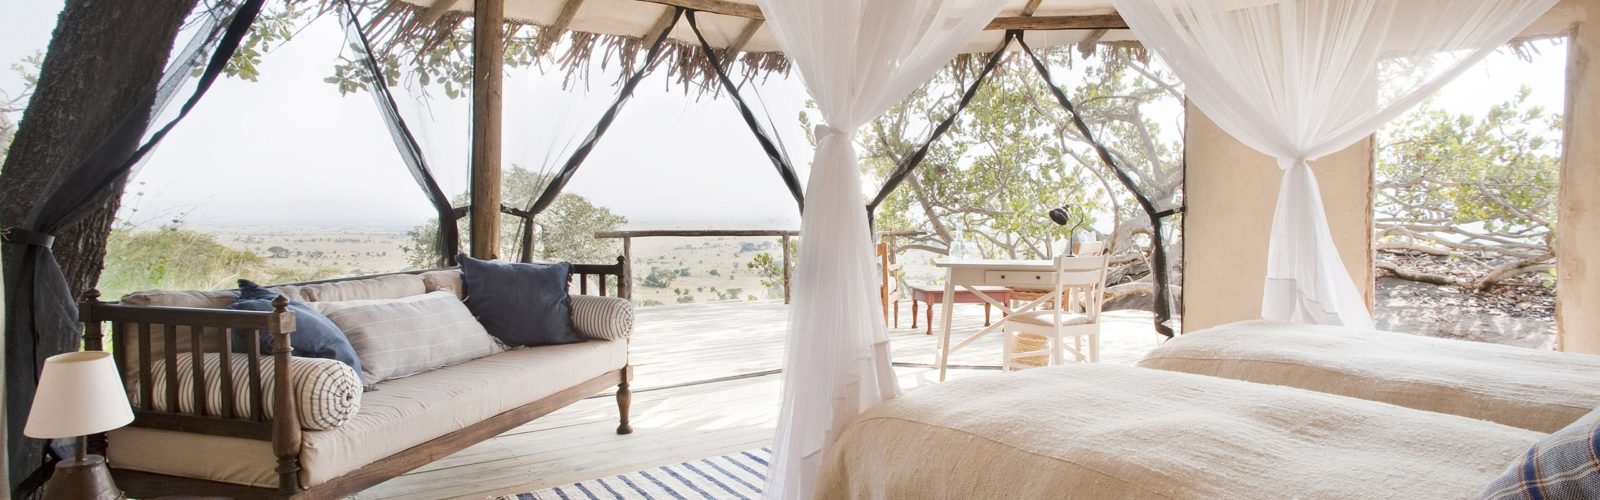 Interior of bedroom at Lamai Serengeti, twin beds with mosquito nets and sofa, open sides with view of the Serengeti National Park, Tanzania